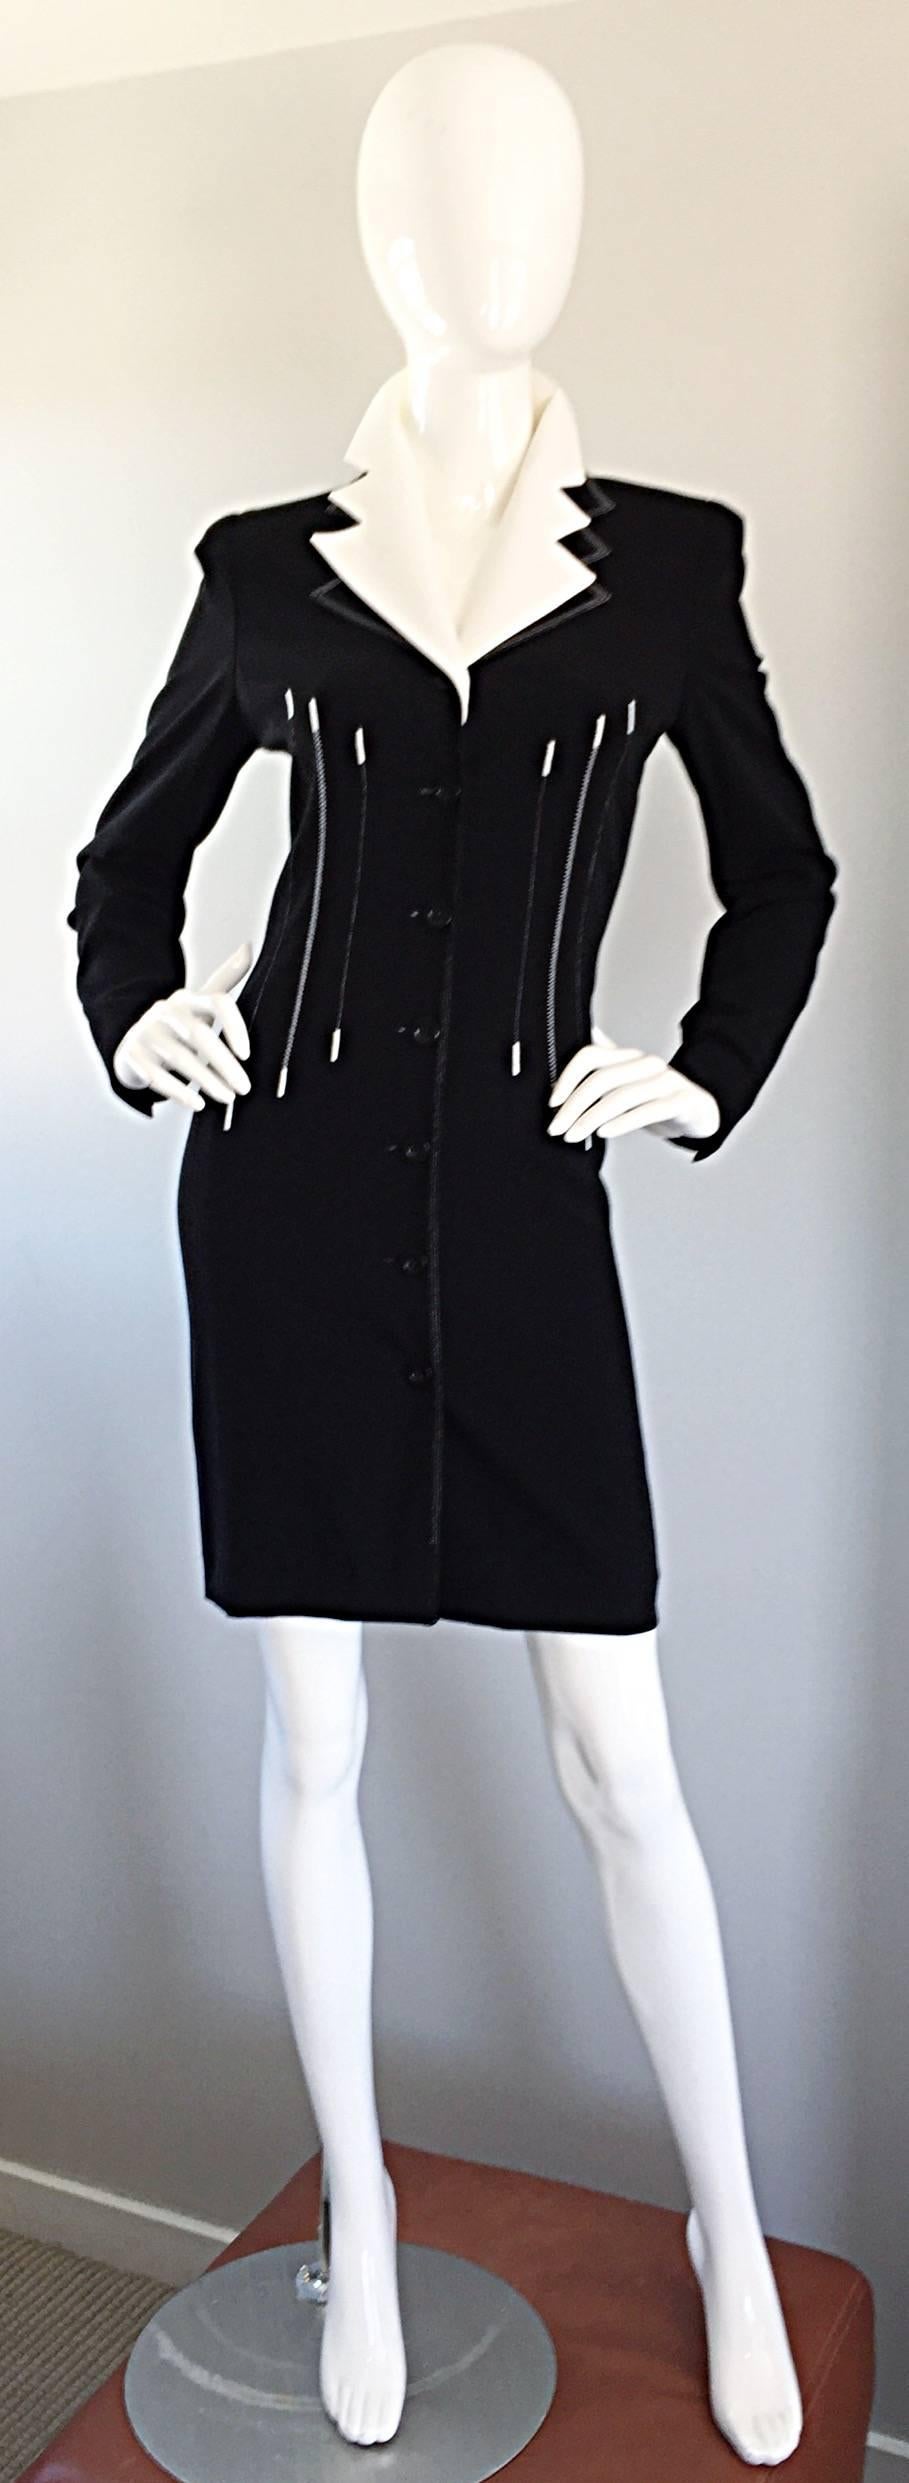 Exceptional vintage ESCADA by MARGARETHA LEY black and white 'piano key' dress or jacket, with removable collar! Black bodycon dress with white embroidery throughout. Avant Garde style with removable collar. Hugs the body in all the right places.